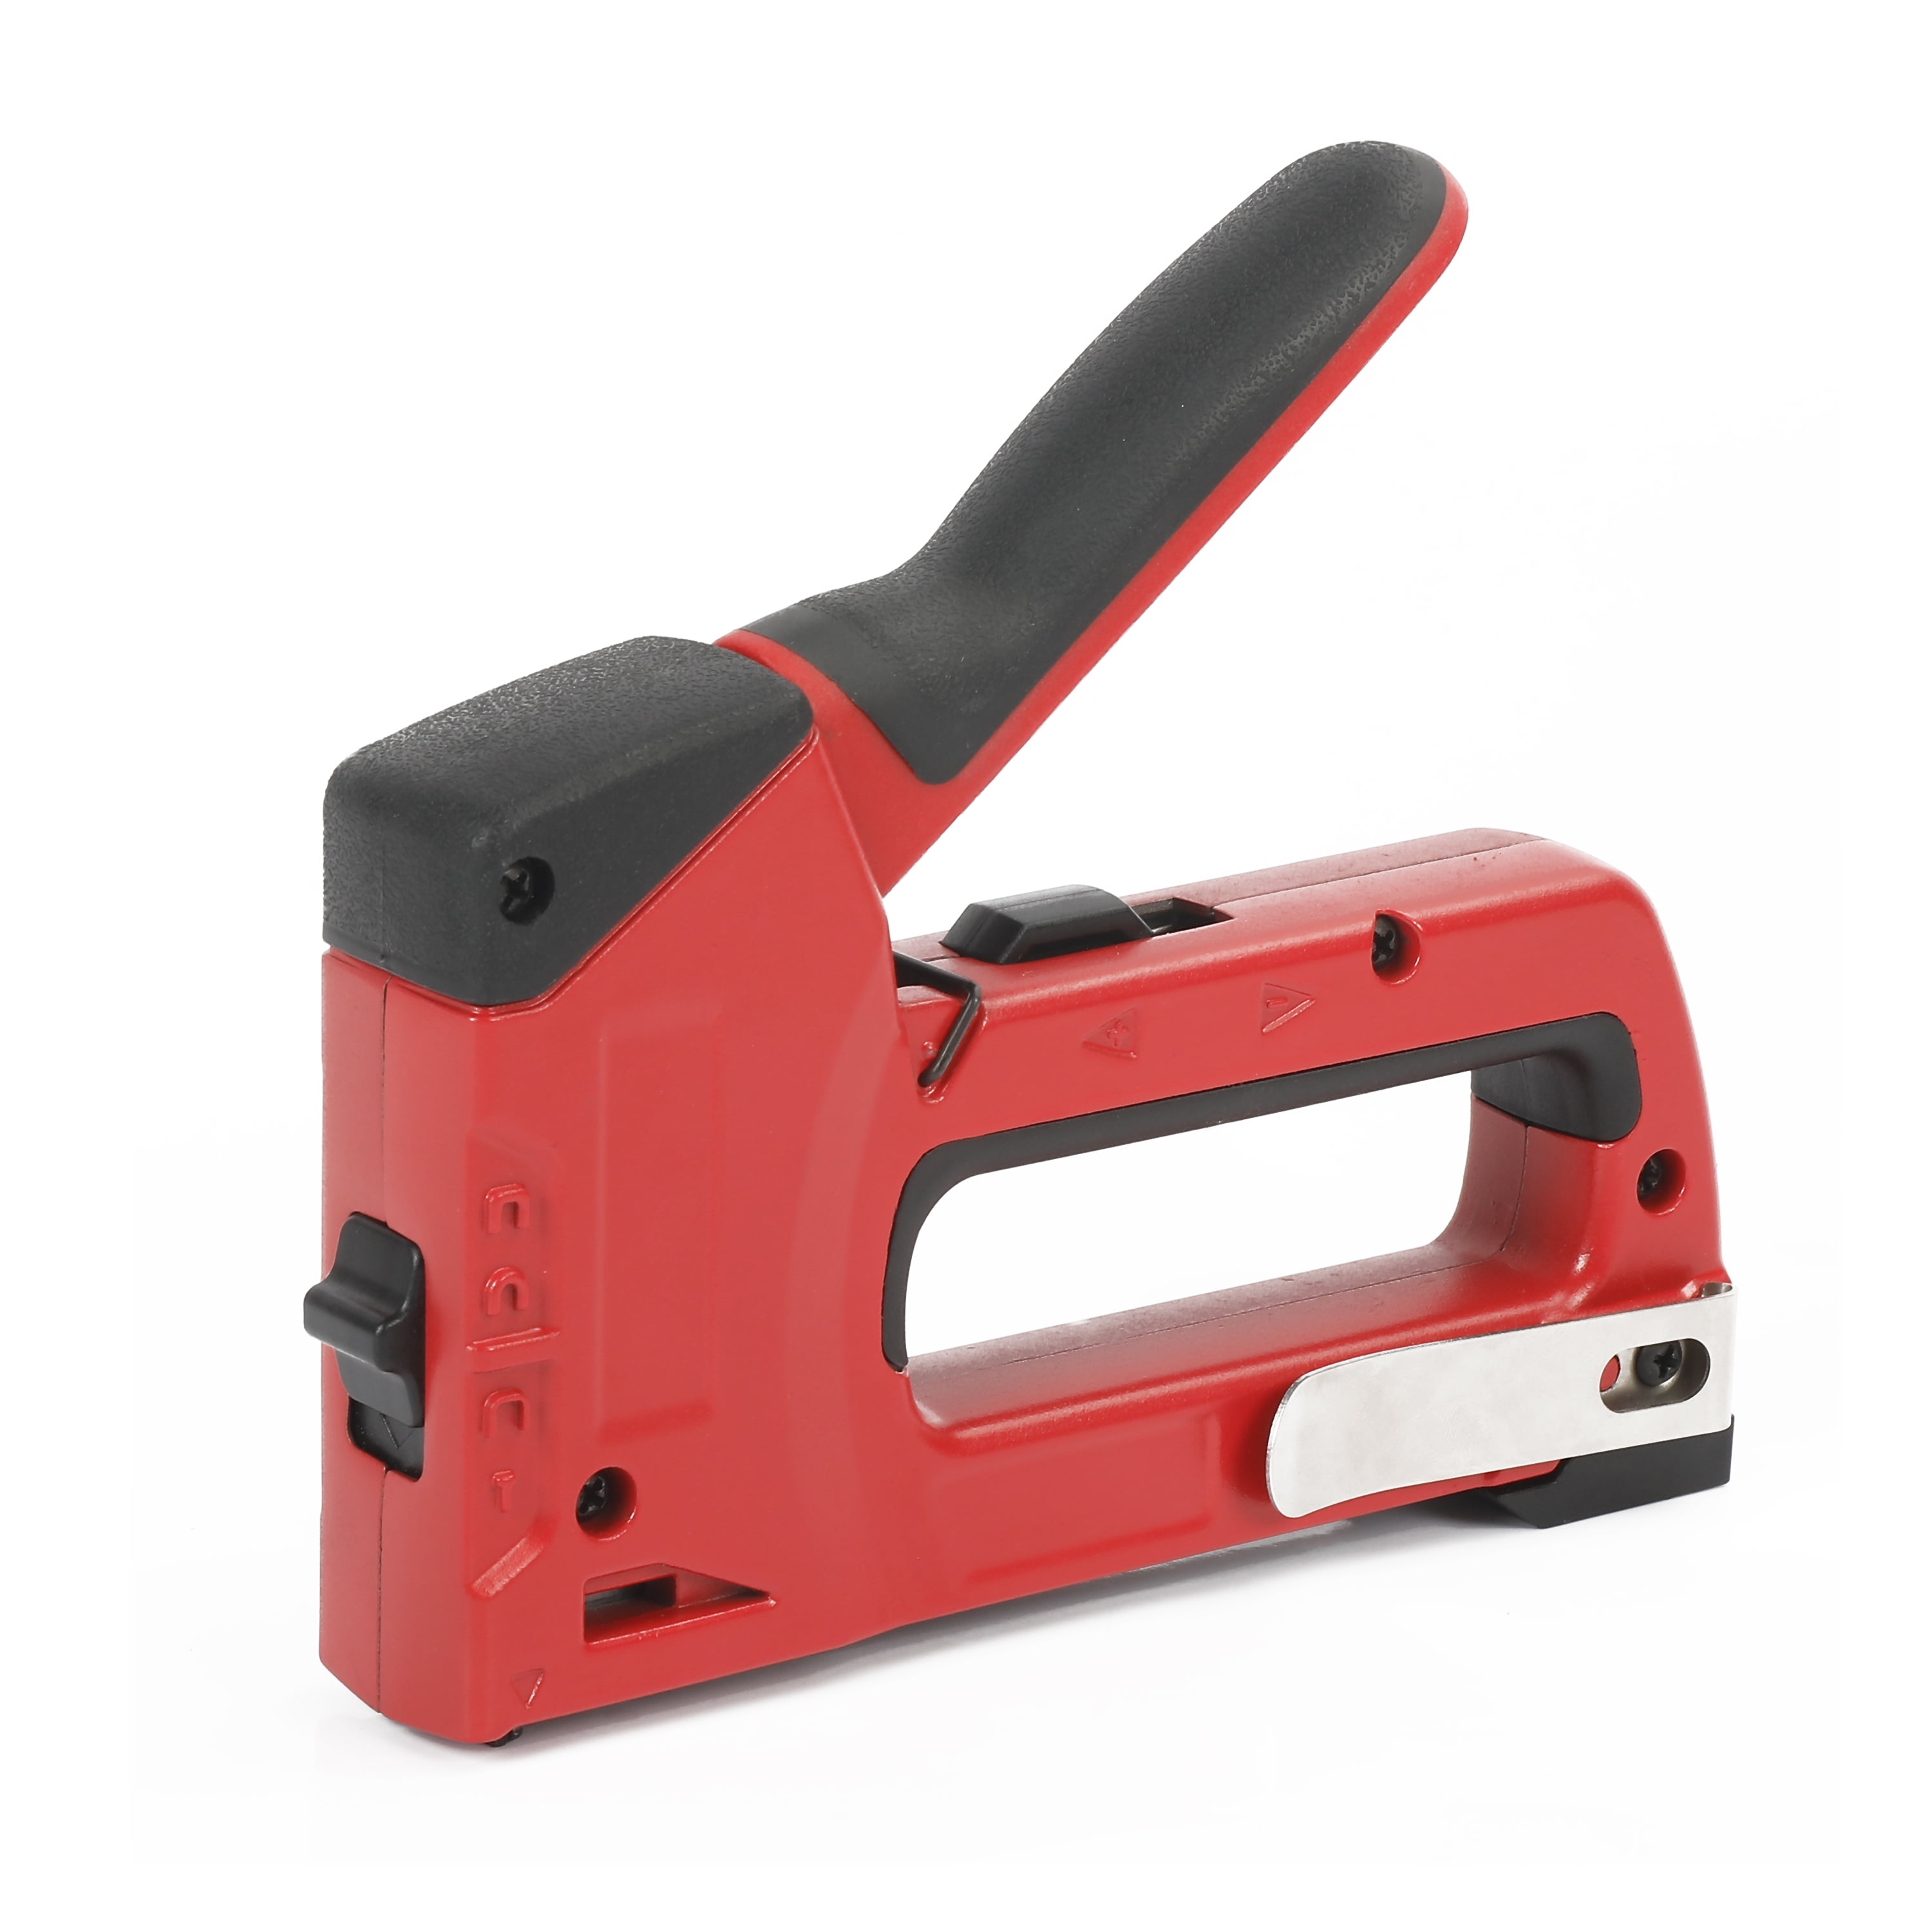 TOOLZILLA 4-in-1 Professional Heavy Duty Staple Gun & 1K Staple Pack, 11.61  H 13.19 L 13.19 W - Foods Co.